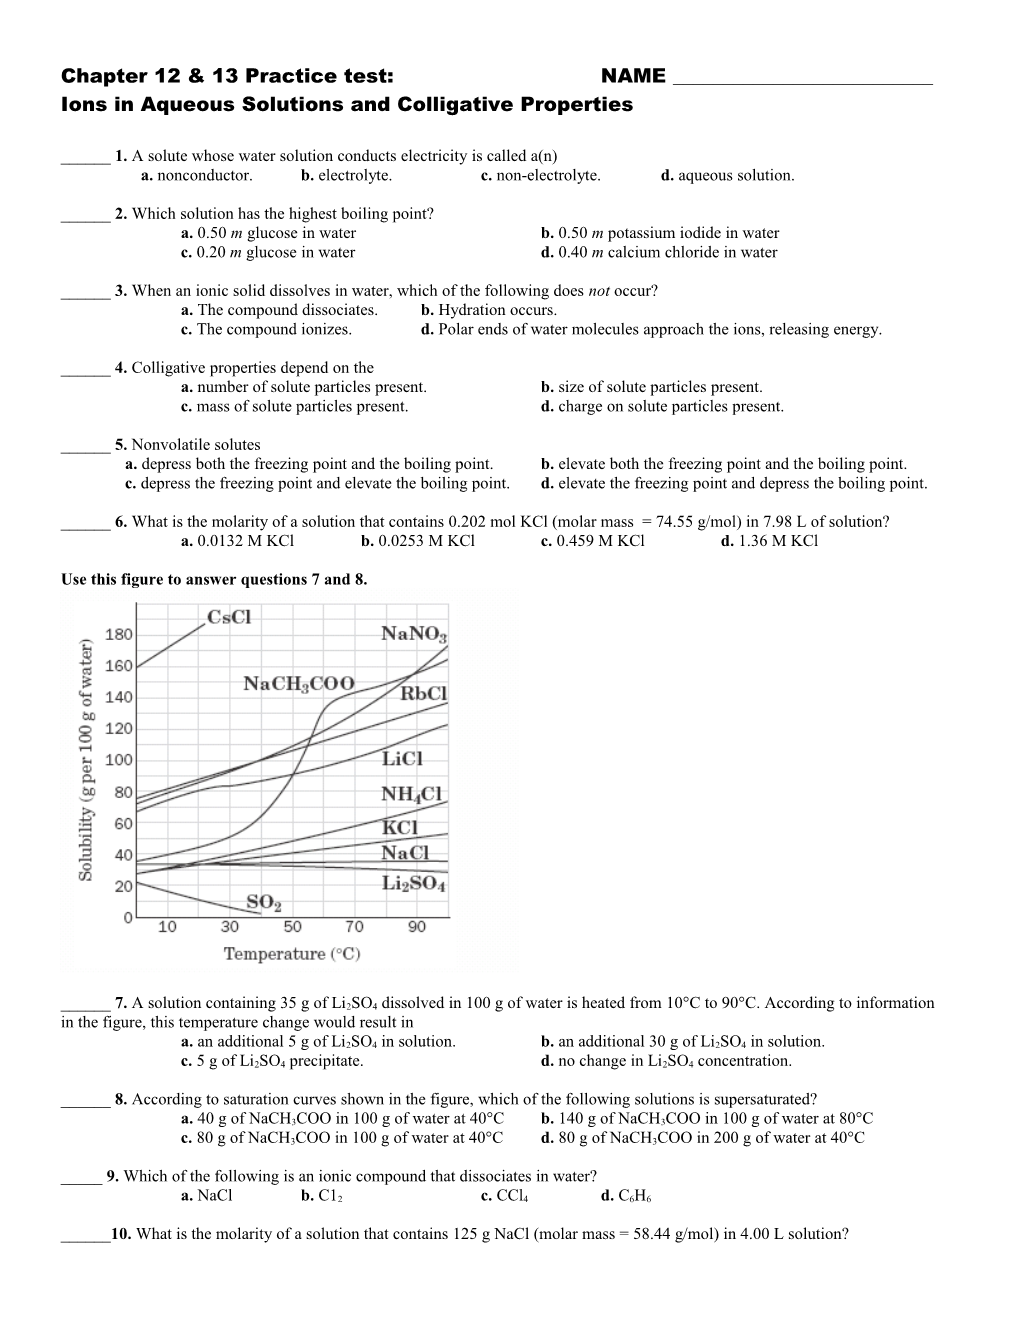 Chapter: Ions In Aqueous Solutions And Colligative